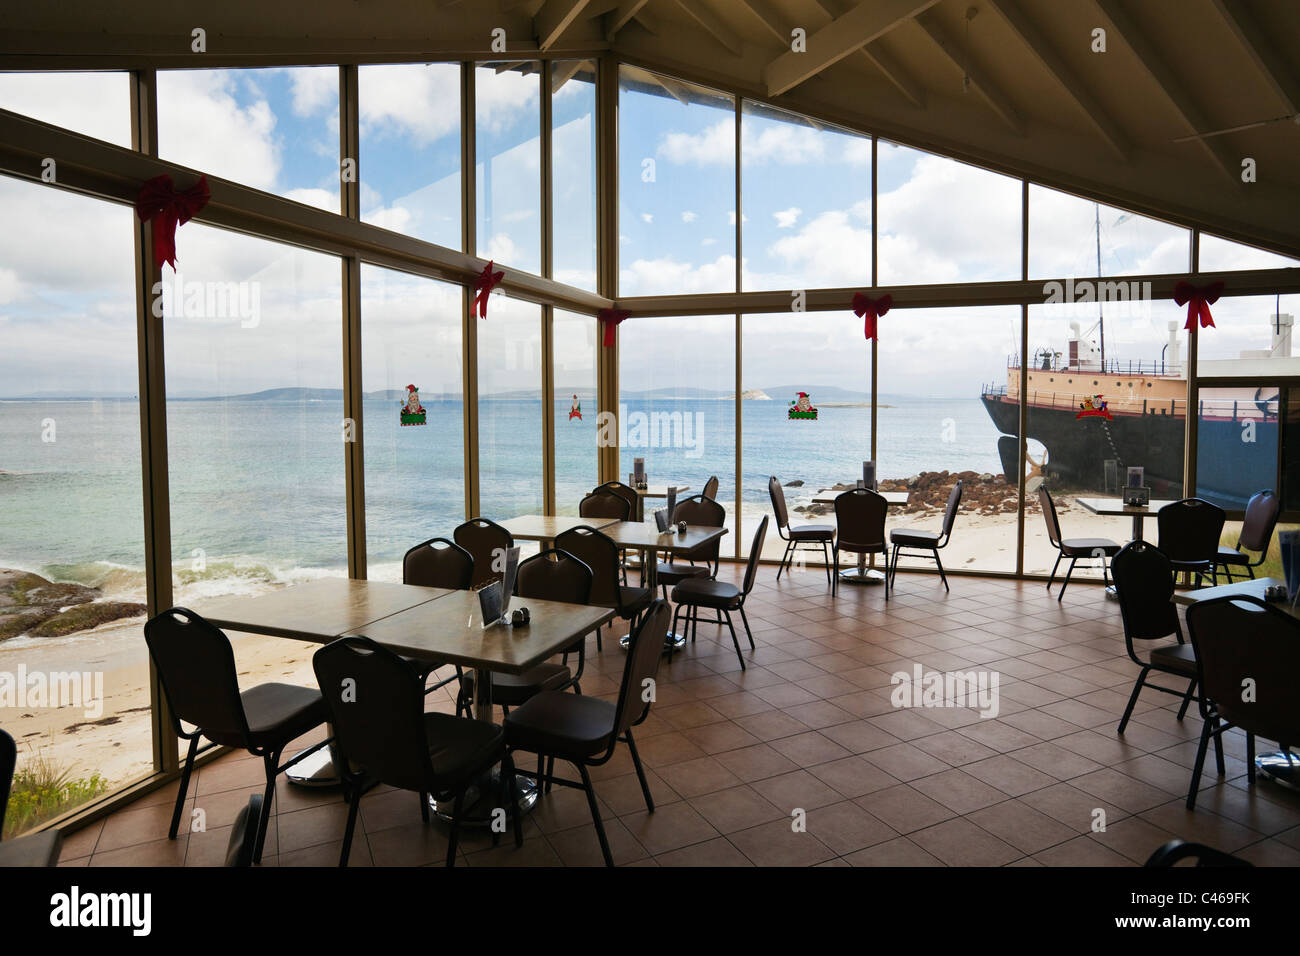 Whalers Gallery Cafe at Whale World museum. Frenchman Bay, Albany, Western Australia, Australia Stock Photo